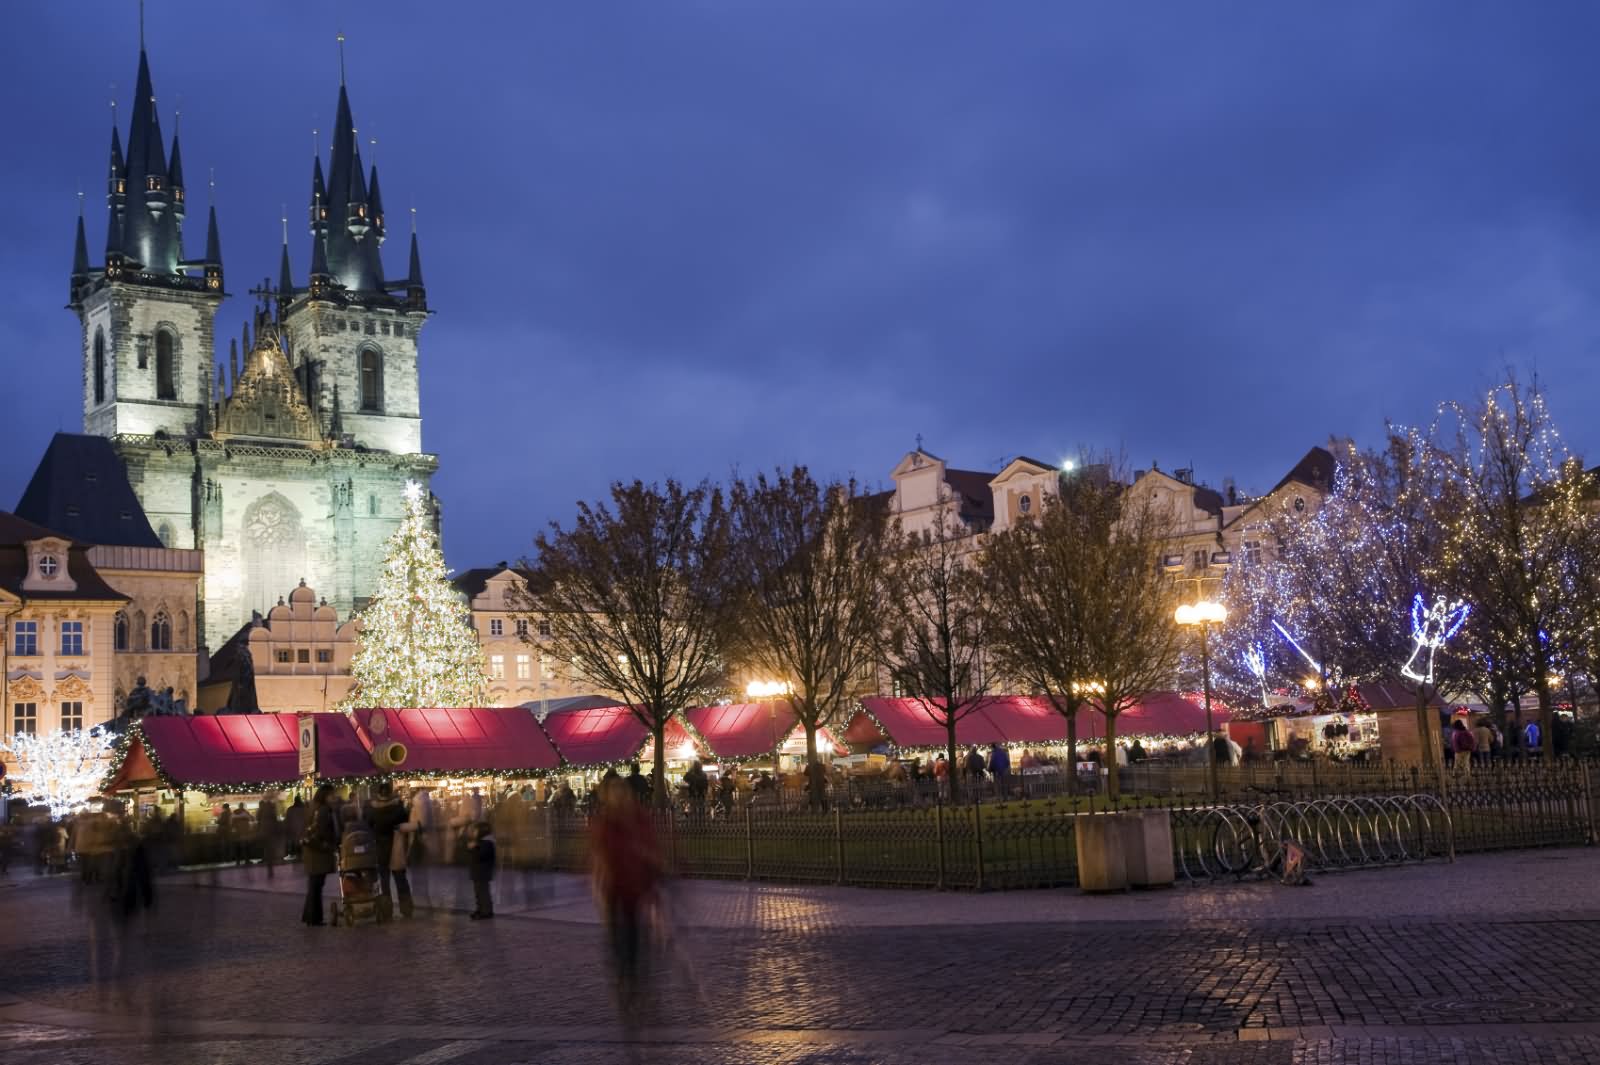 Christmas Markets At The Old Town Square, Prague